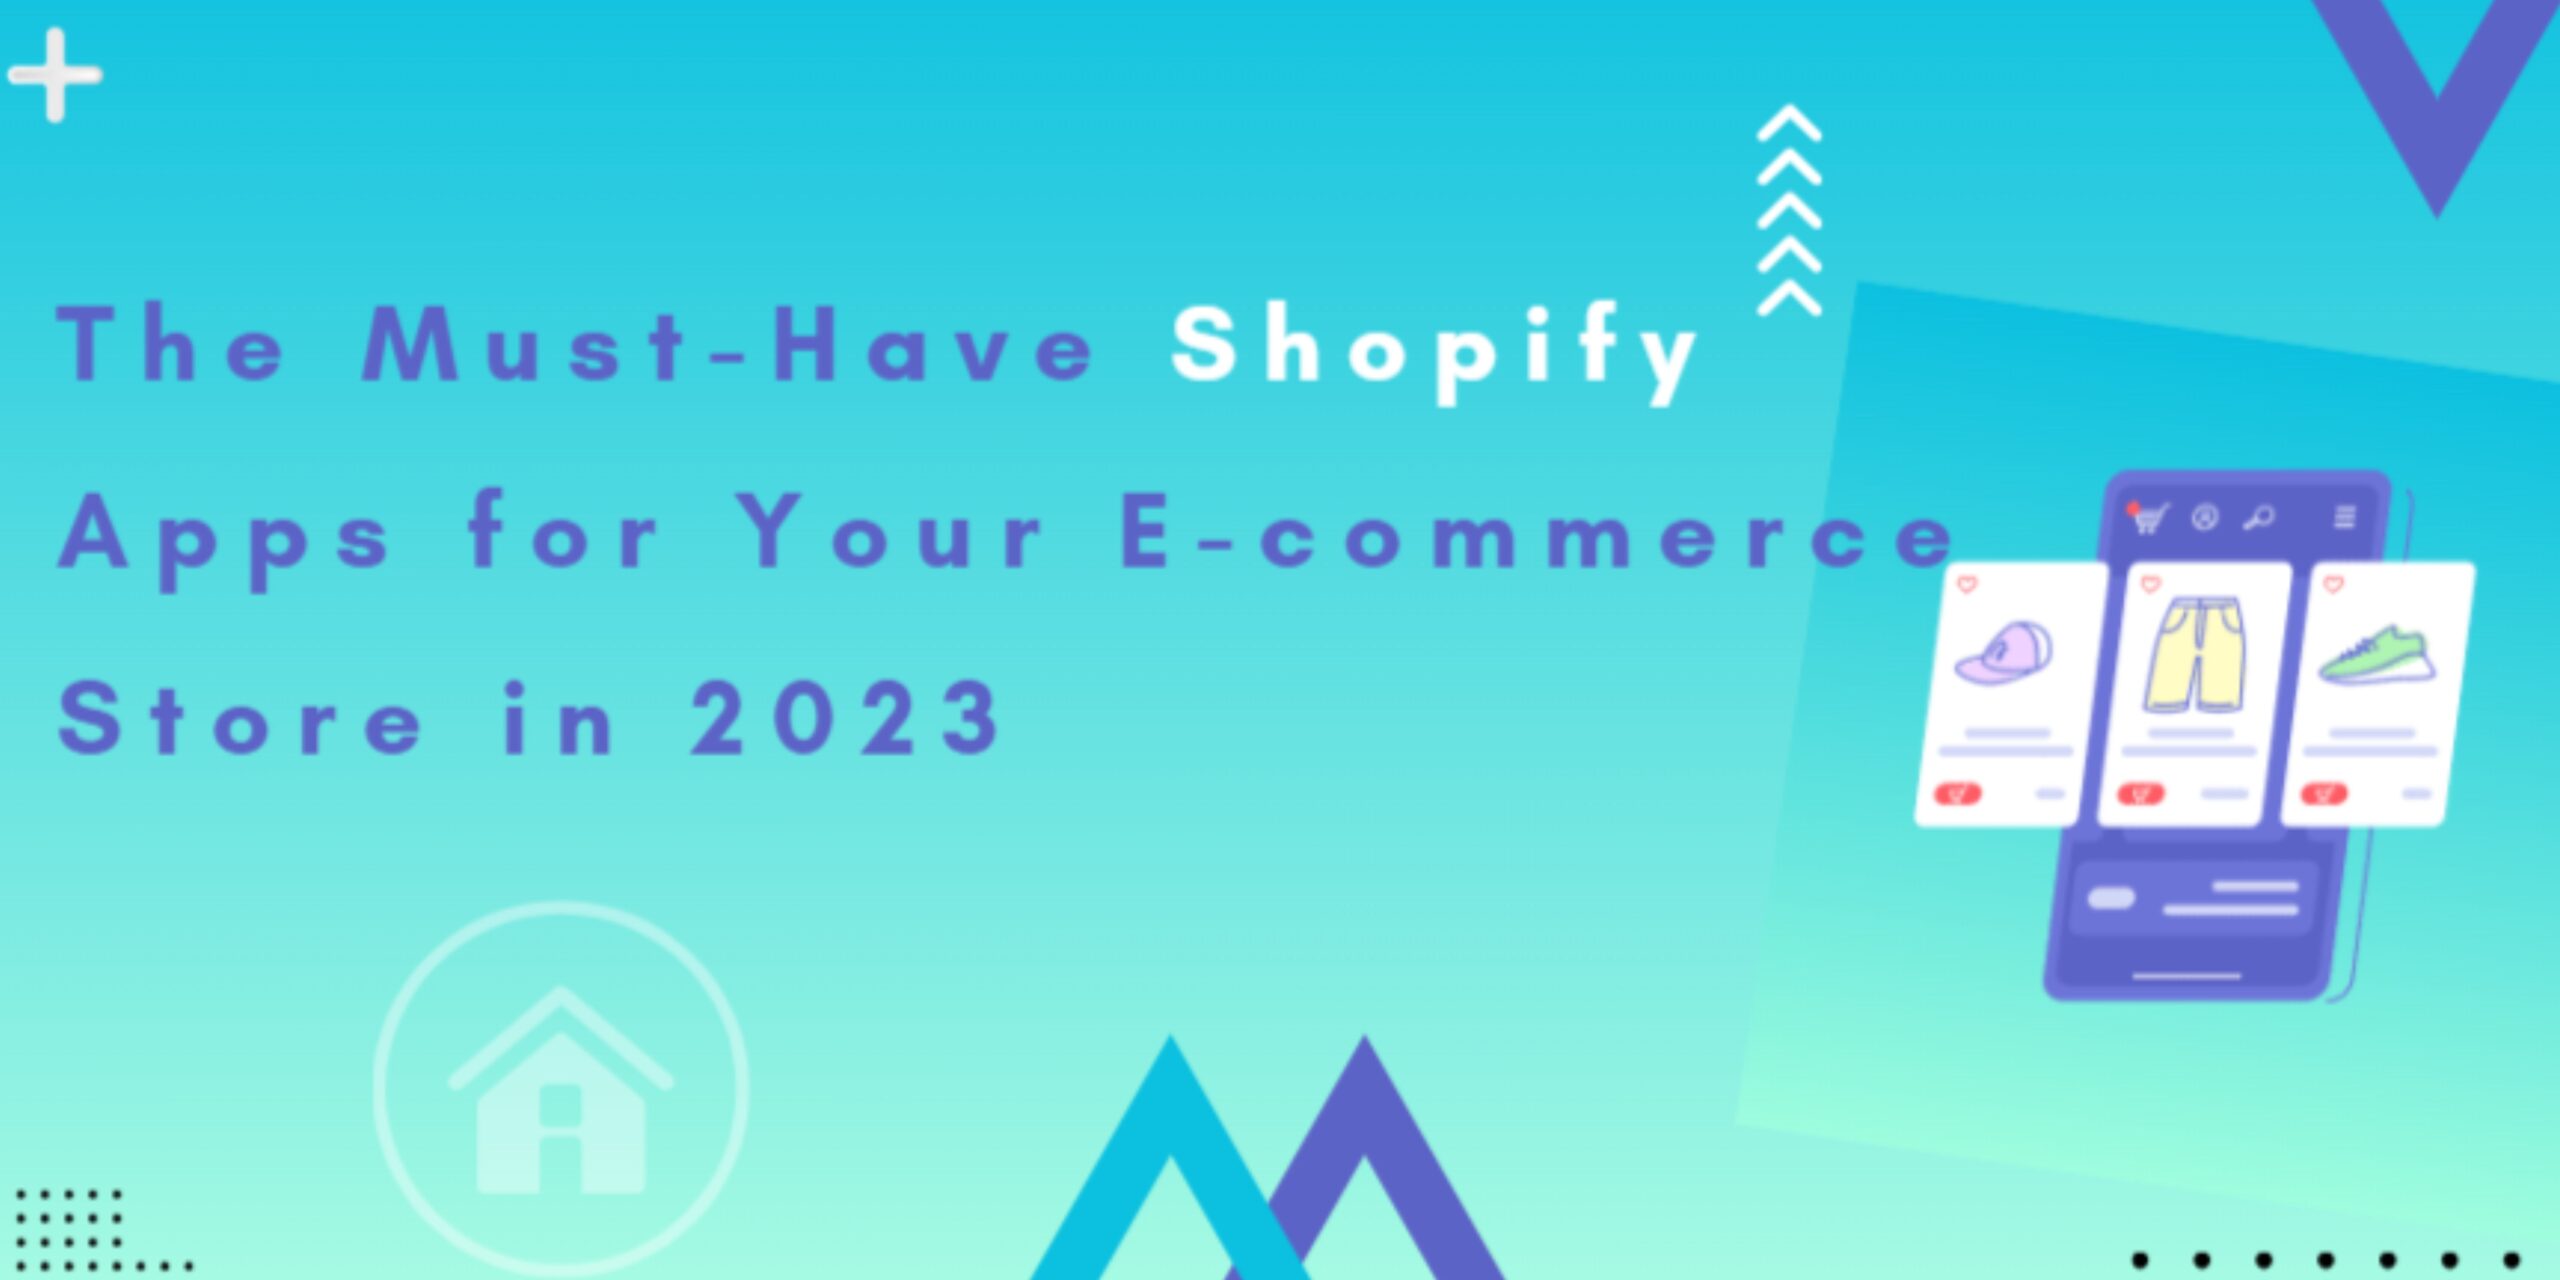 The Must-Have Shopify Apps for Your E-commerce Store in 2023